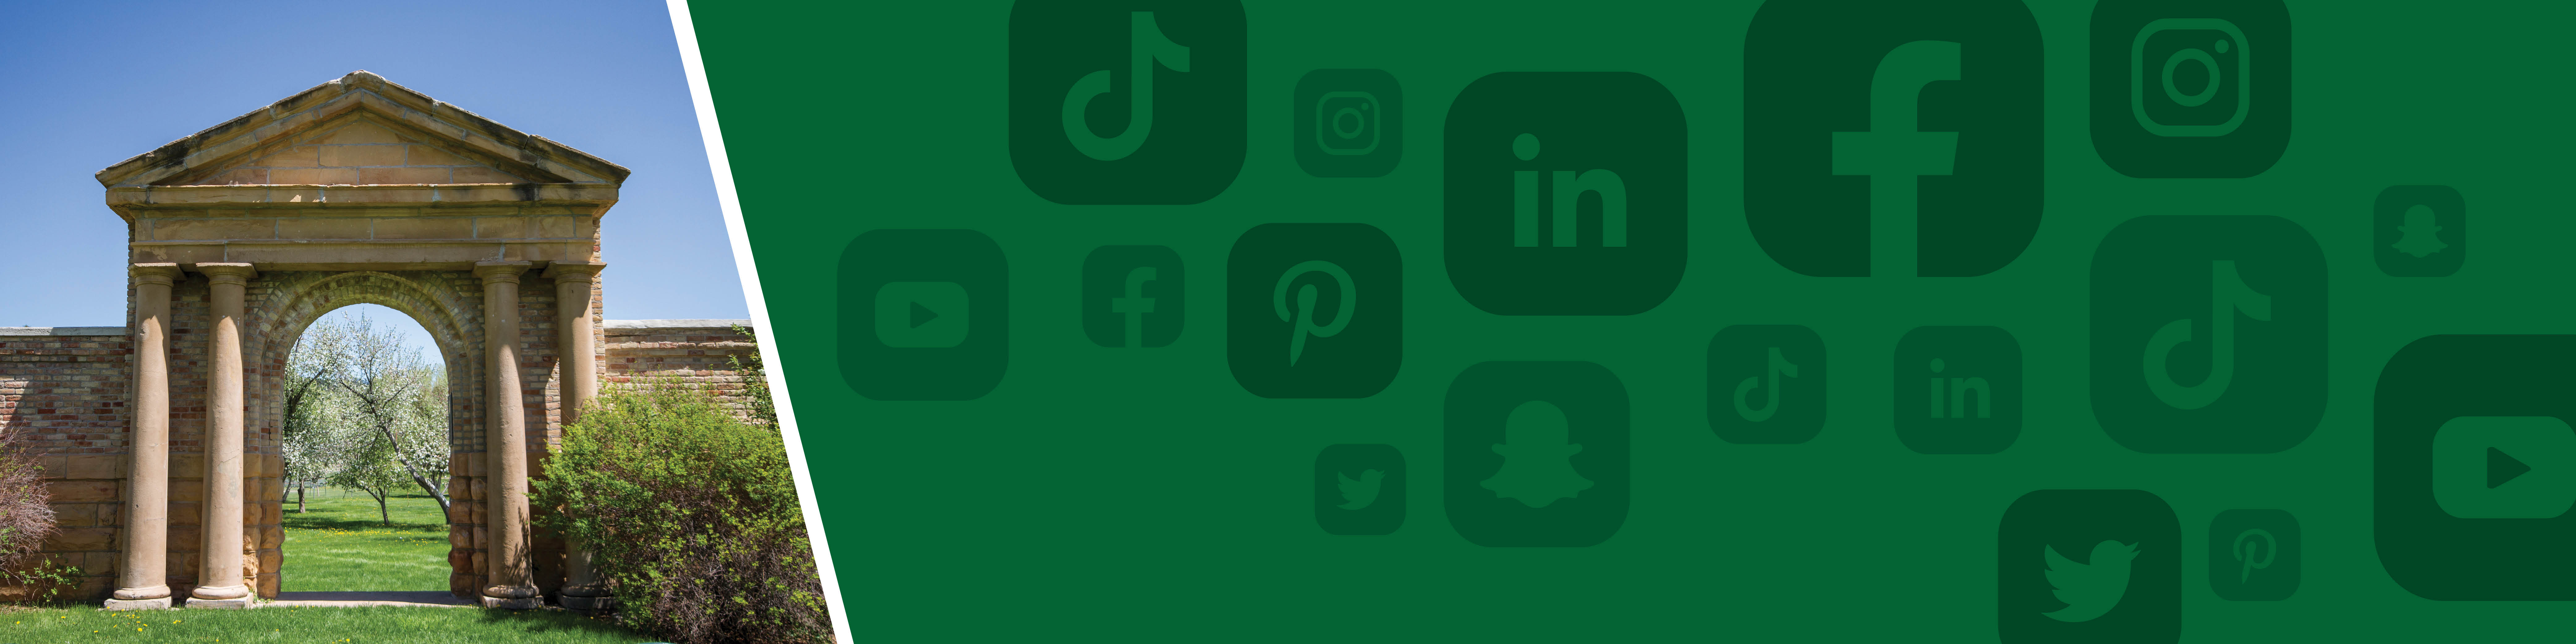 Social Media icons on green background